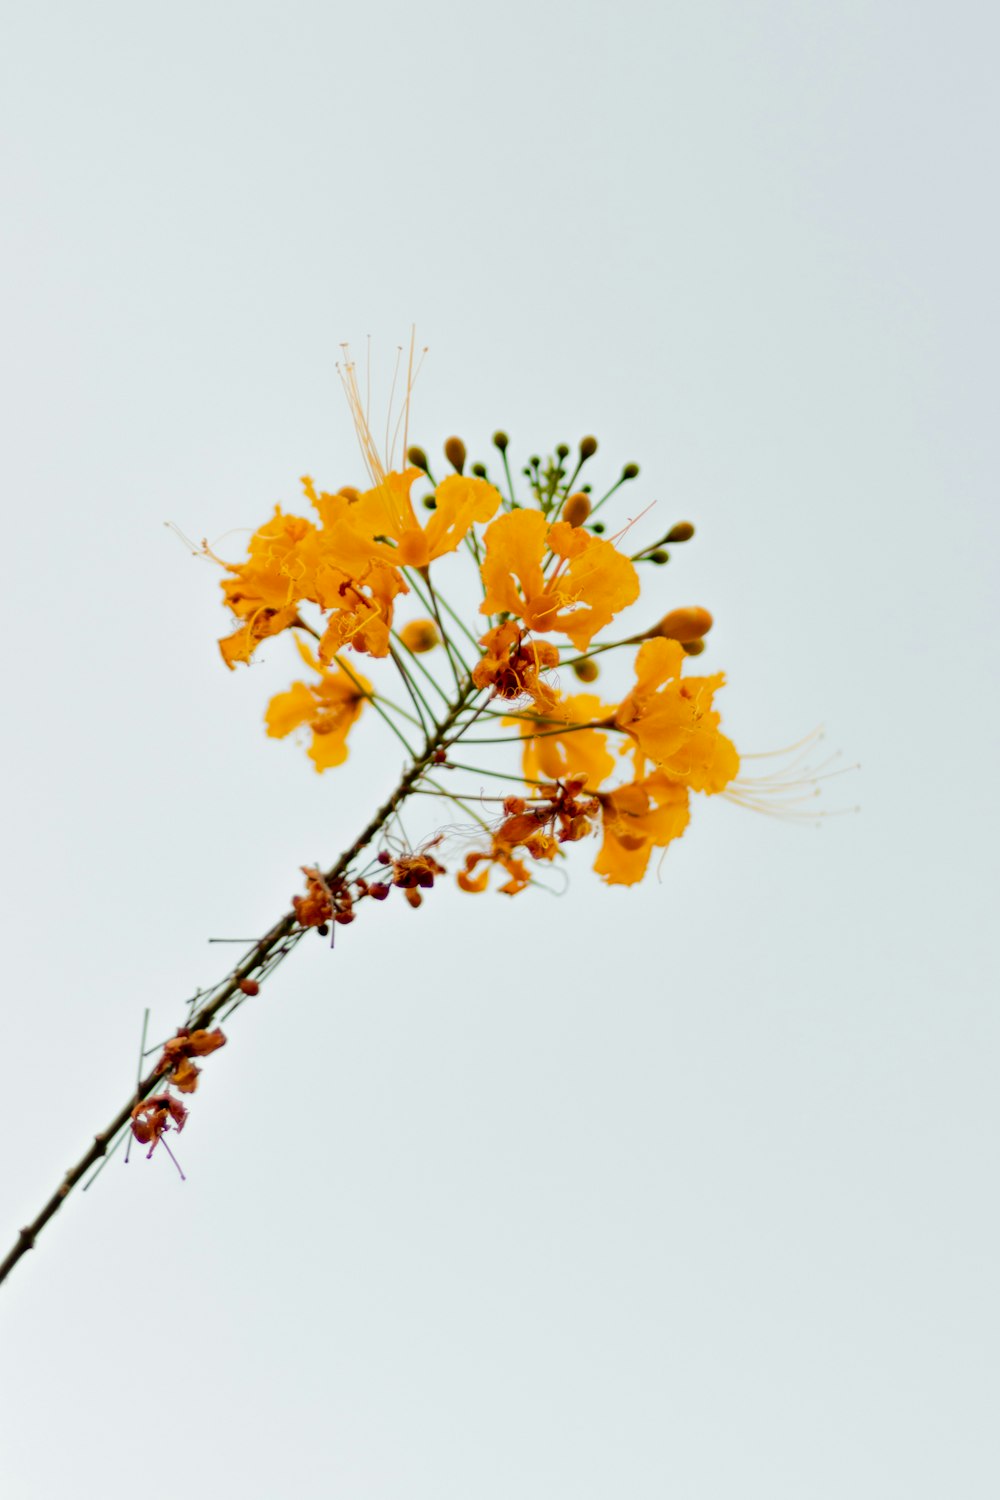 a branch with yellow flowers against a white sky